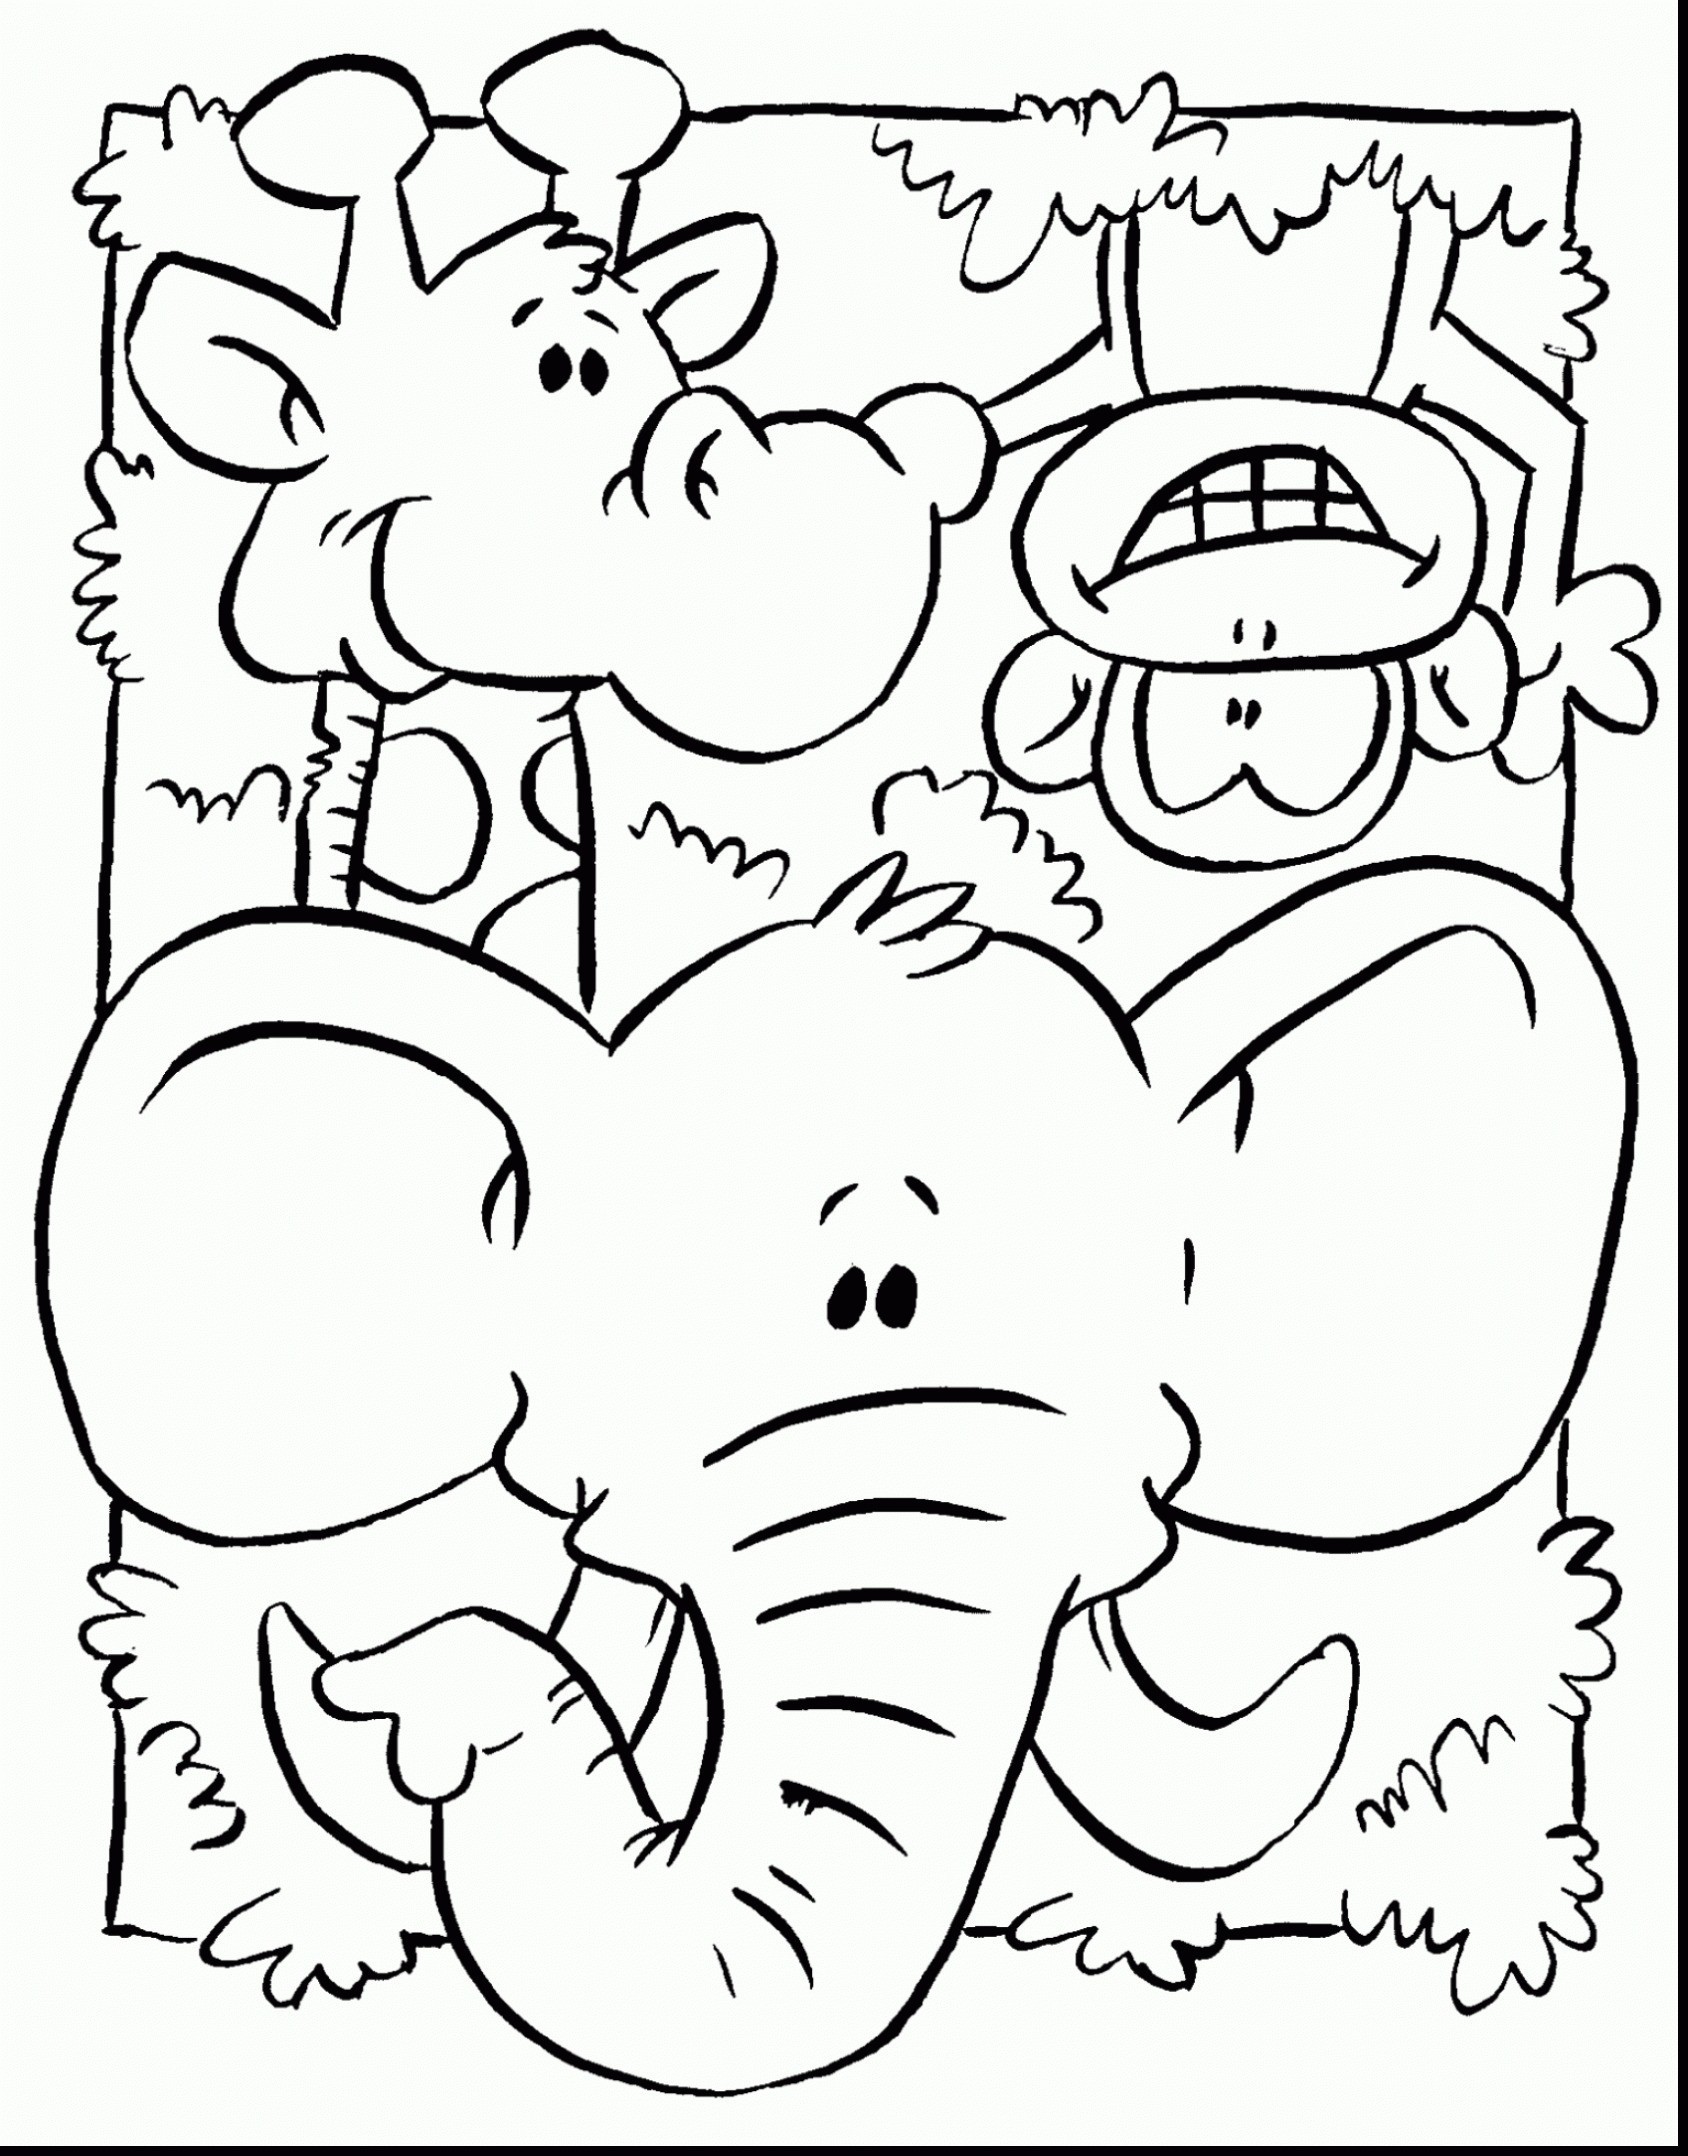 Zoo Animal Coloring Pages Wallpaper